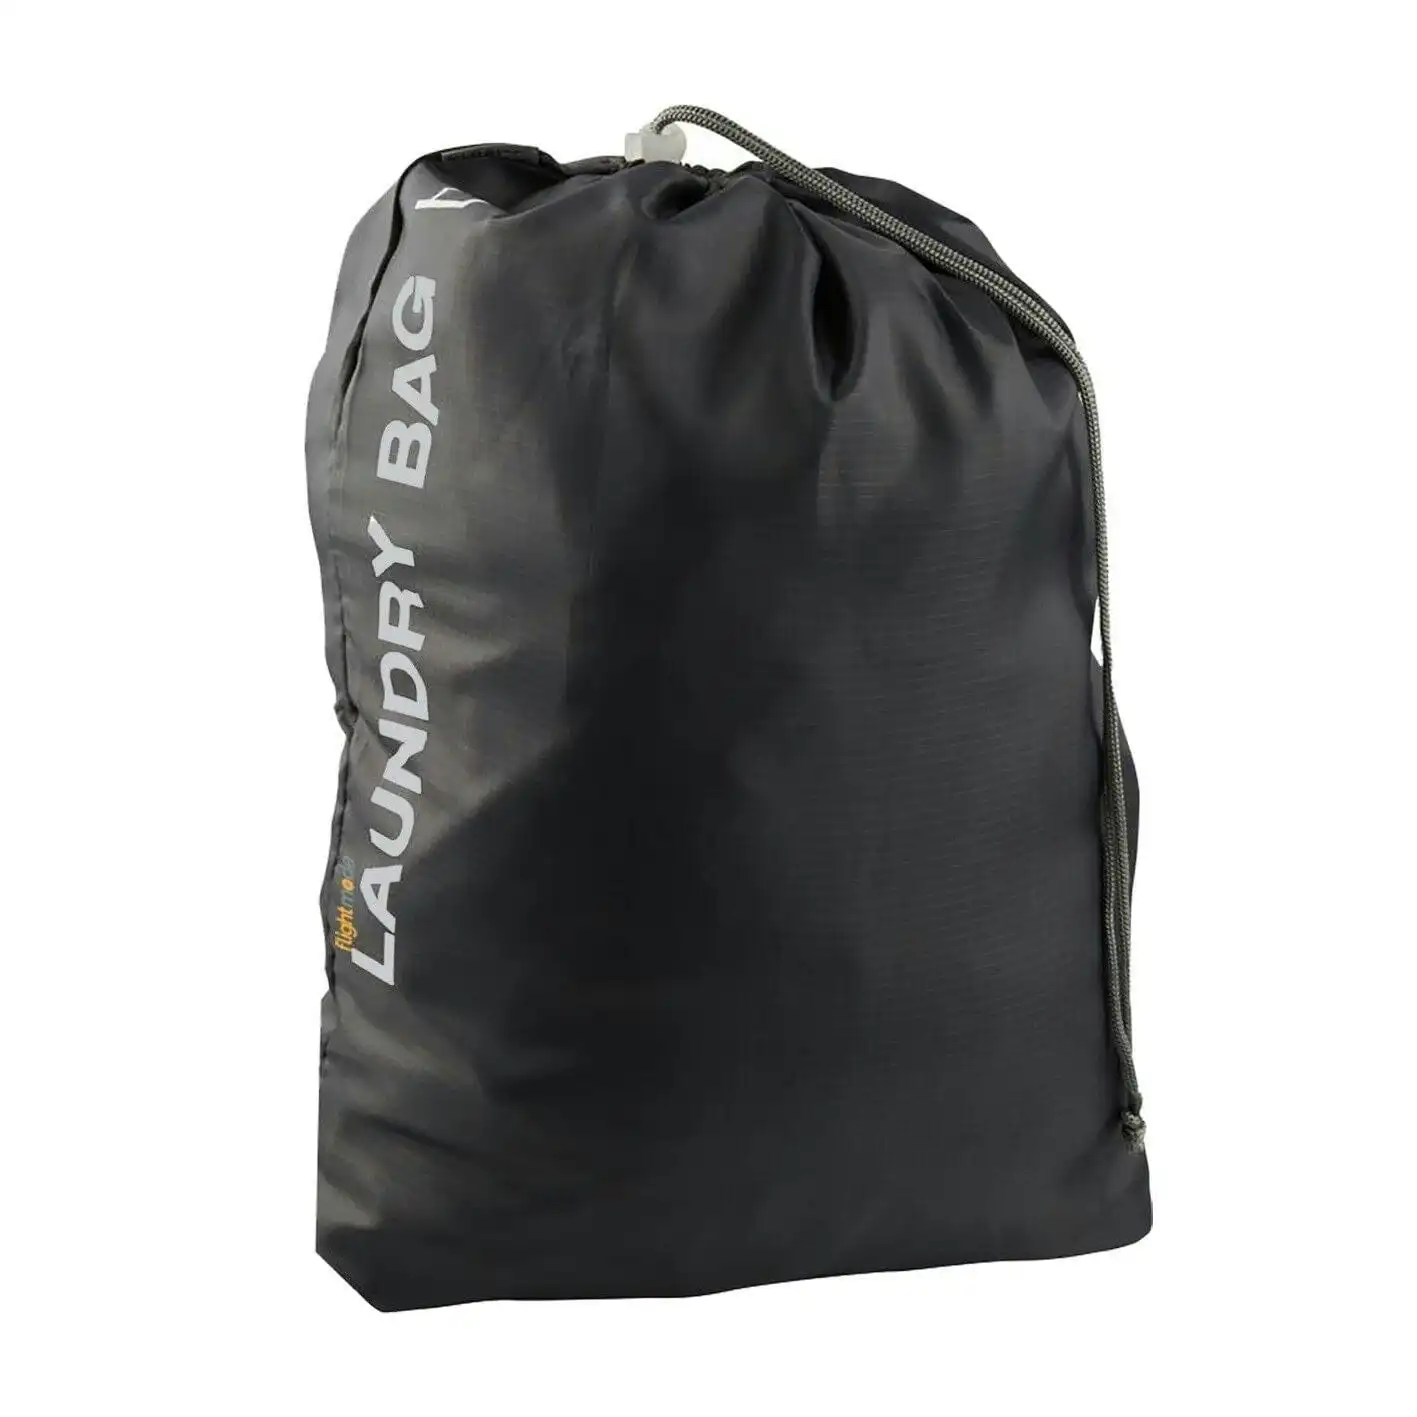 Travel Laundry Bag Drawstring Water Resistant Sports Gym Clothes Organiser